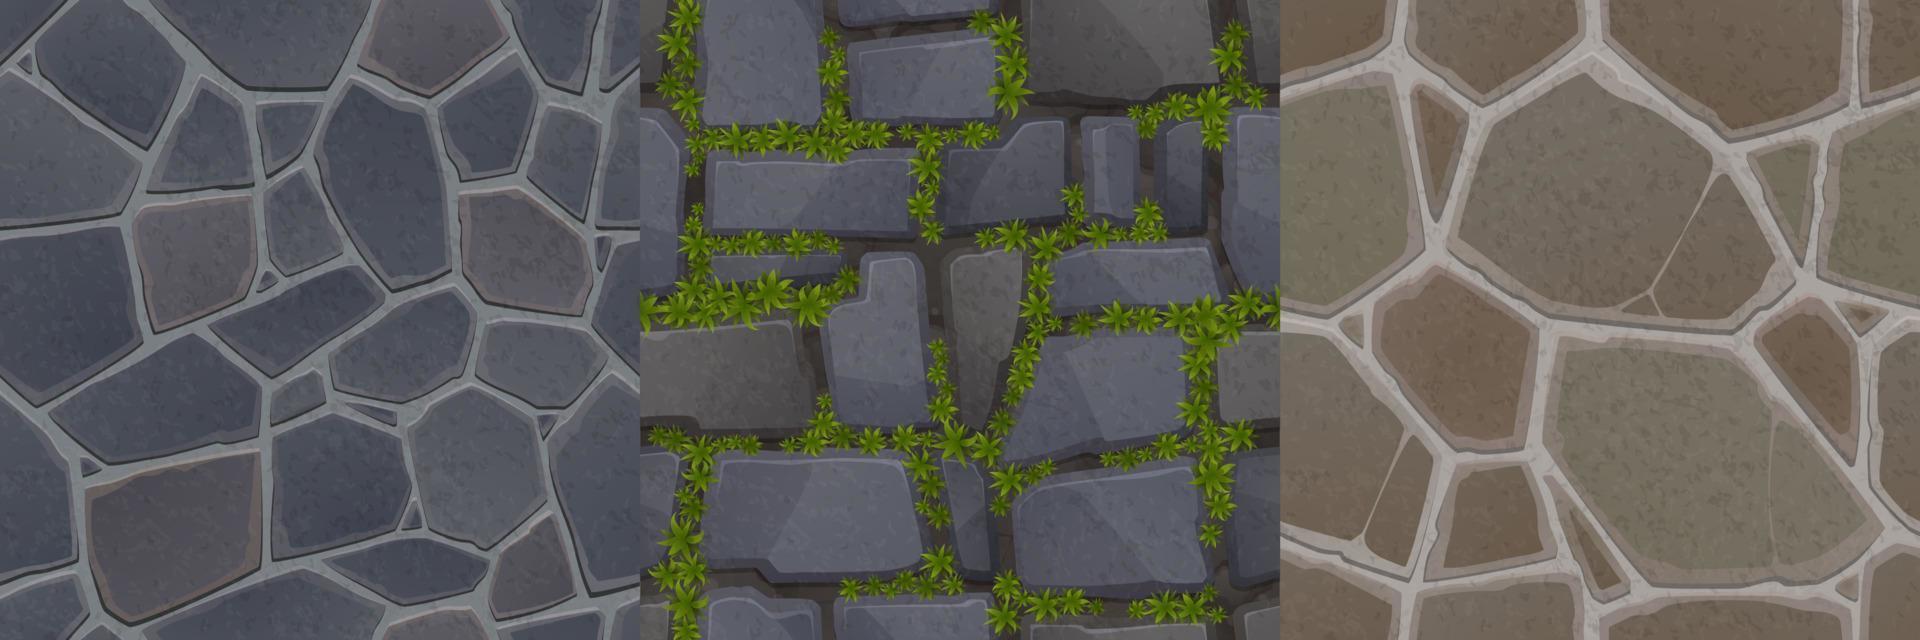 Game stone textures, seamless patterns of pavement vector